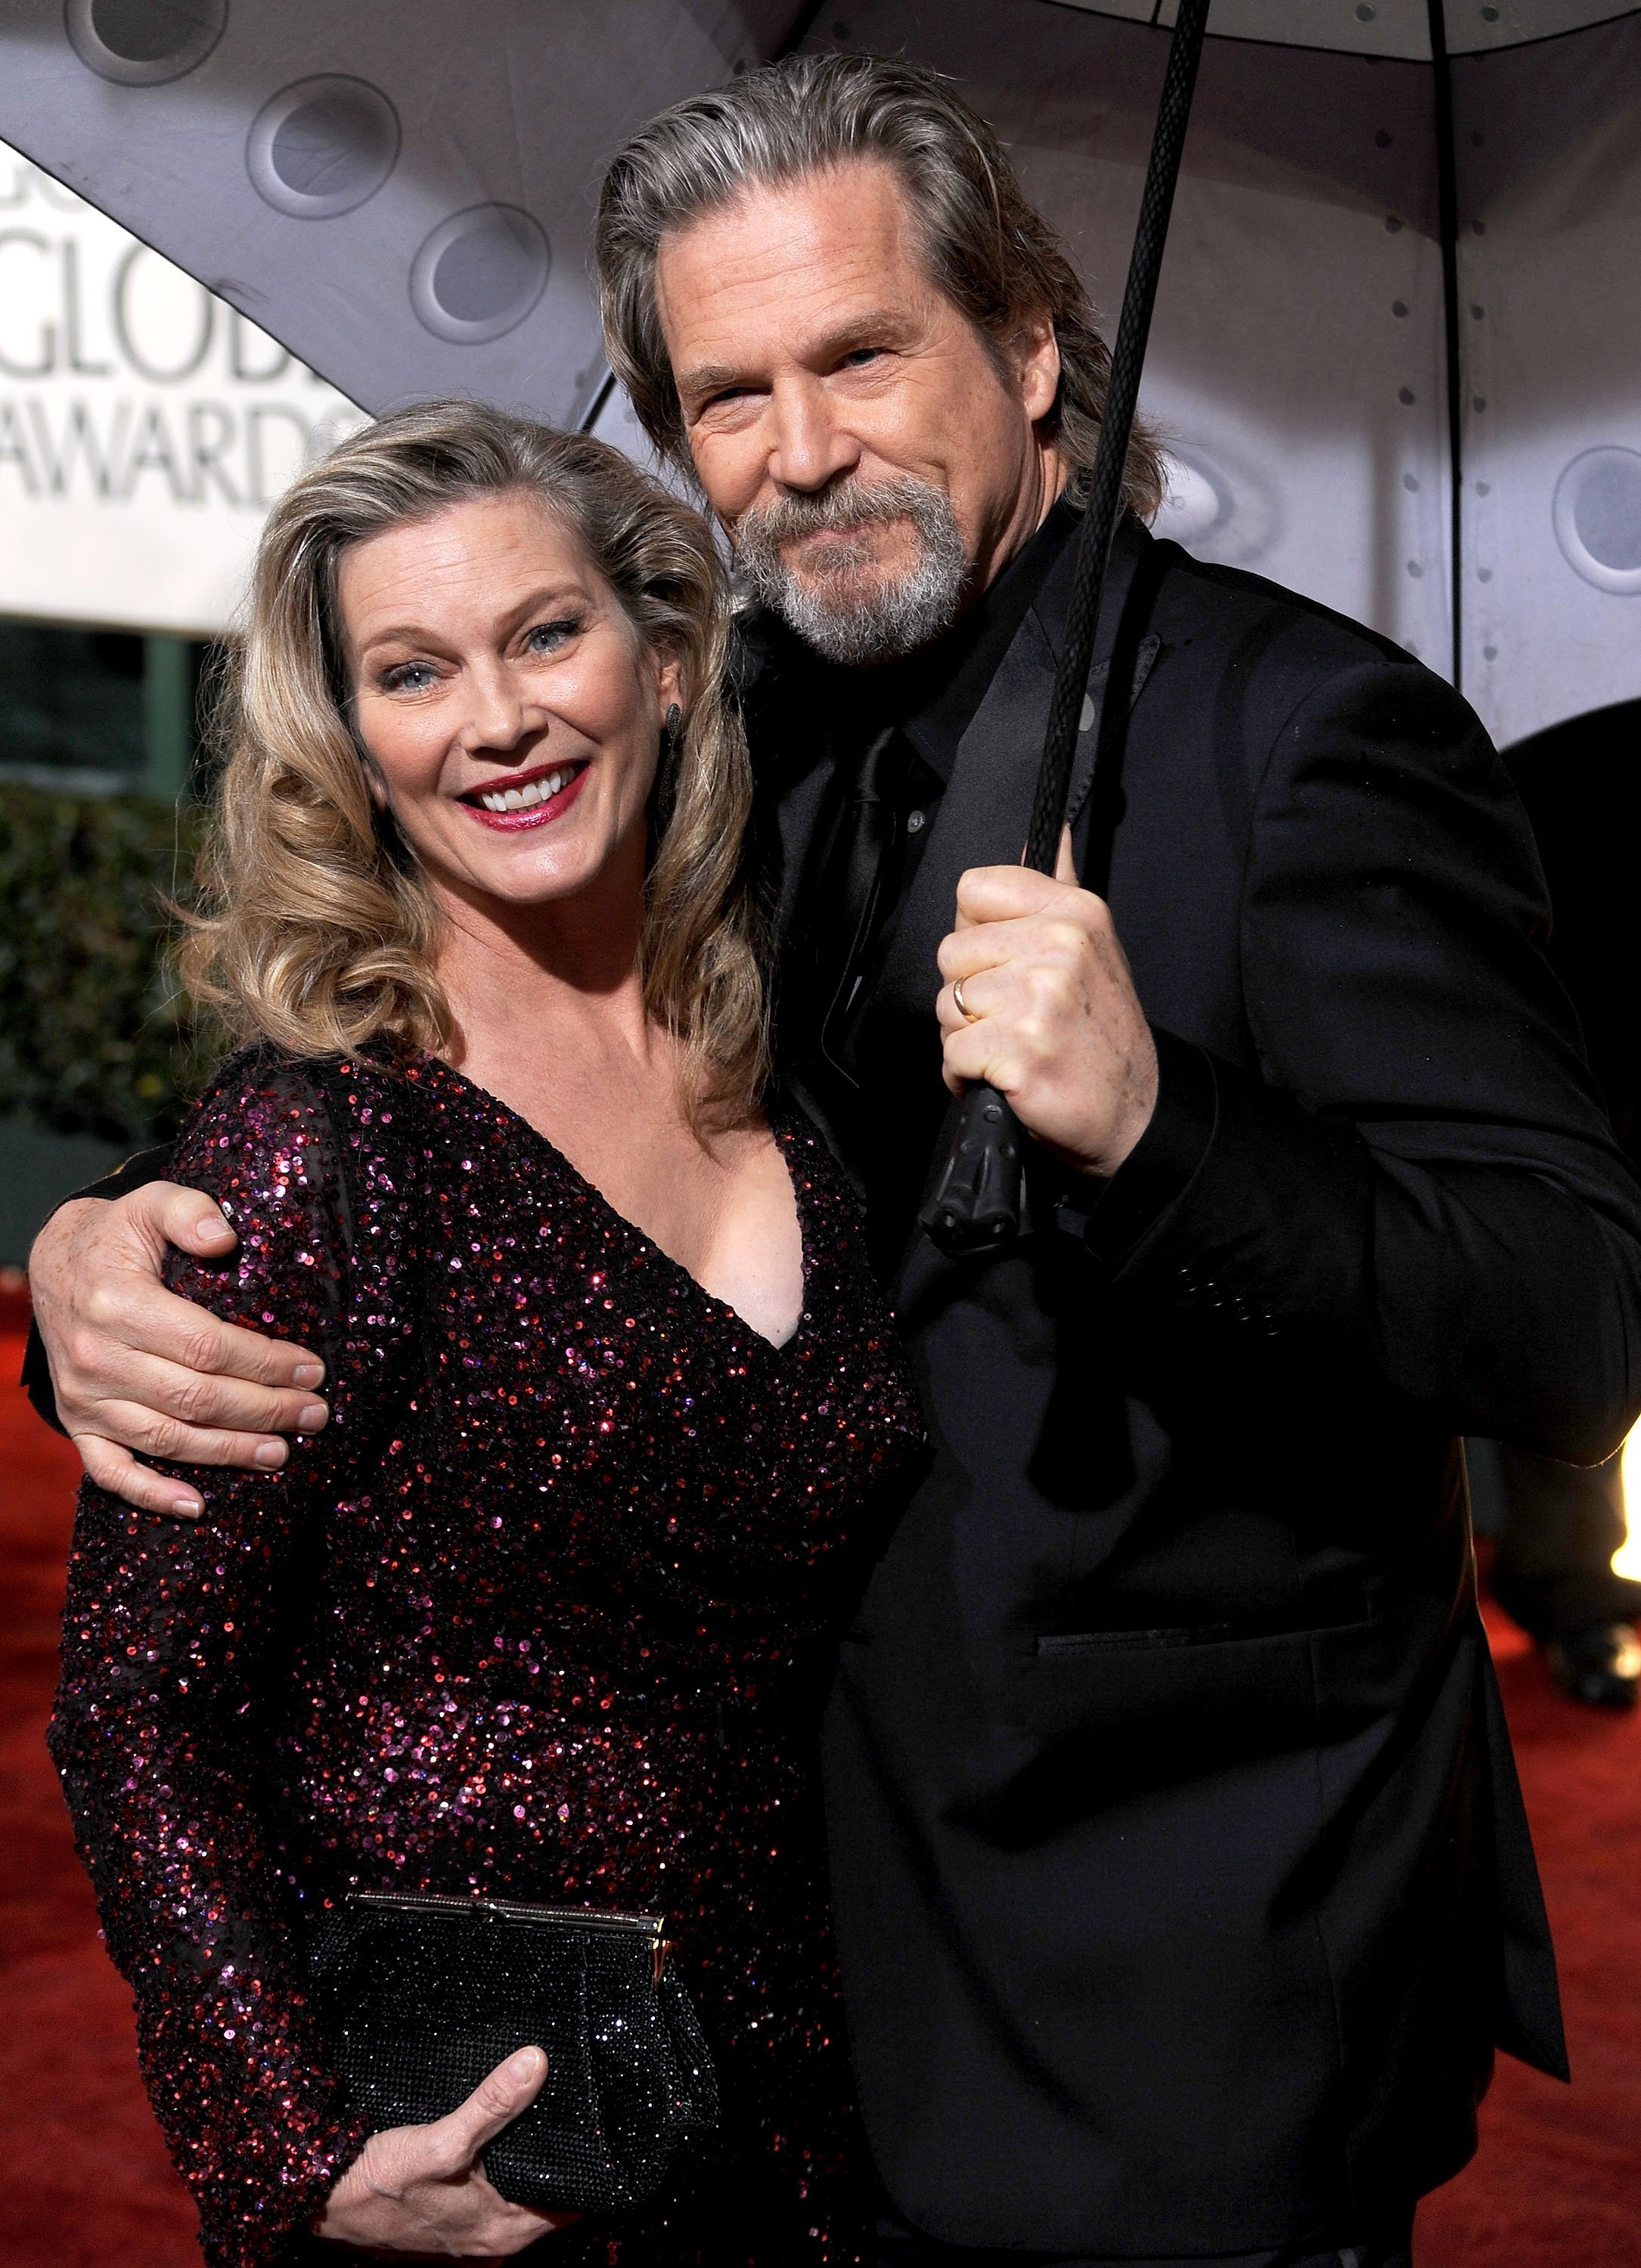 Susan Geston and actor Jeff Bridges arrive at the 67th Annual Golden Globe Awards on January 17, 2010. | Source: Getty Images